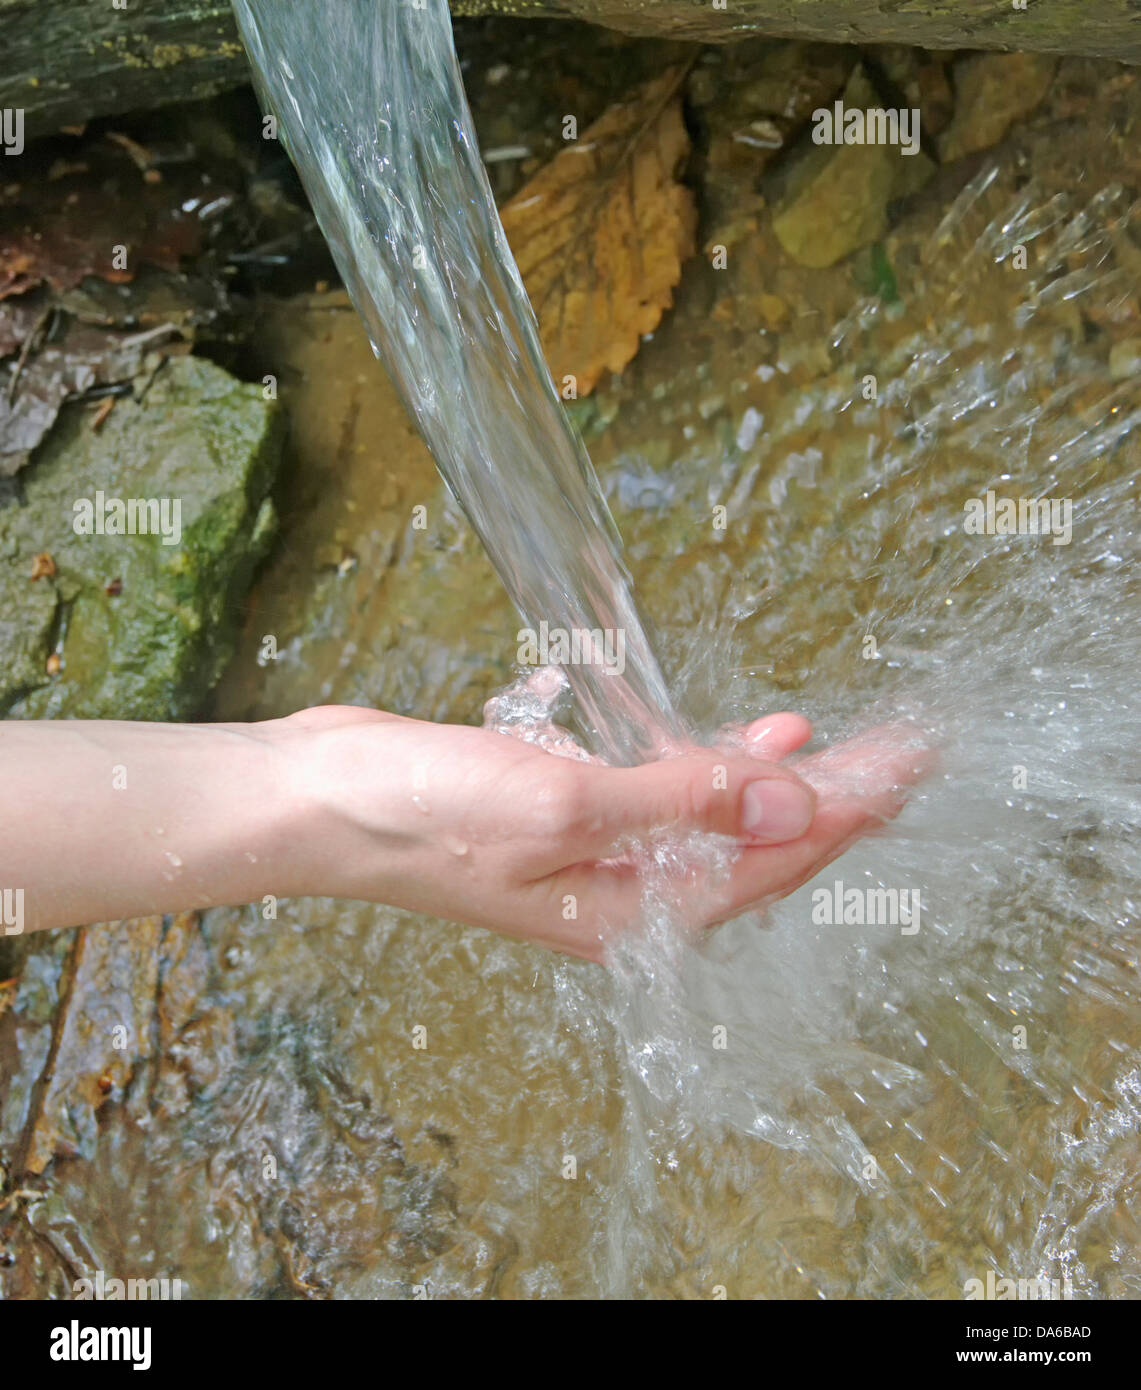 water flow in hands from Pure spring forest Stock Photo